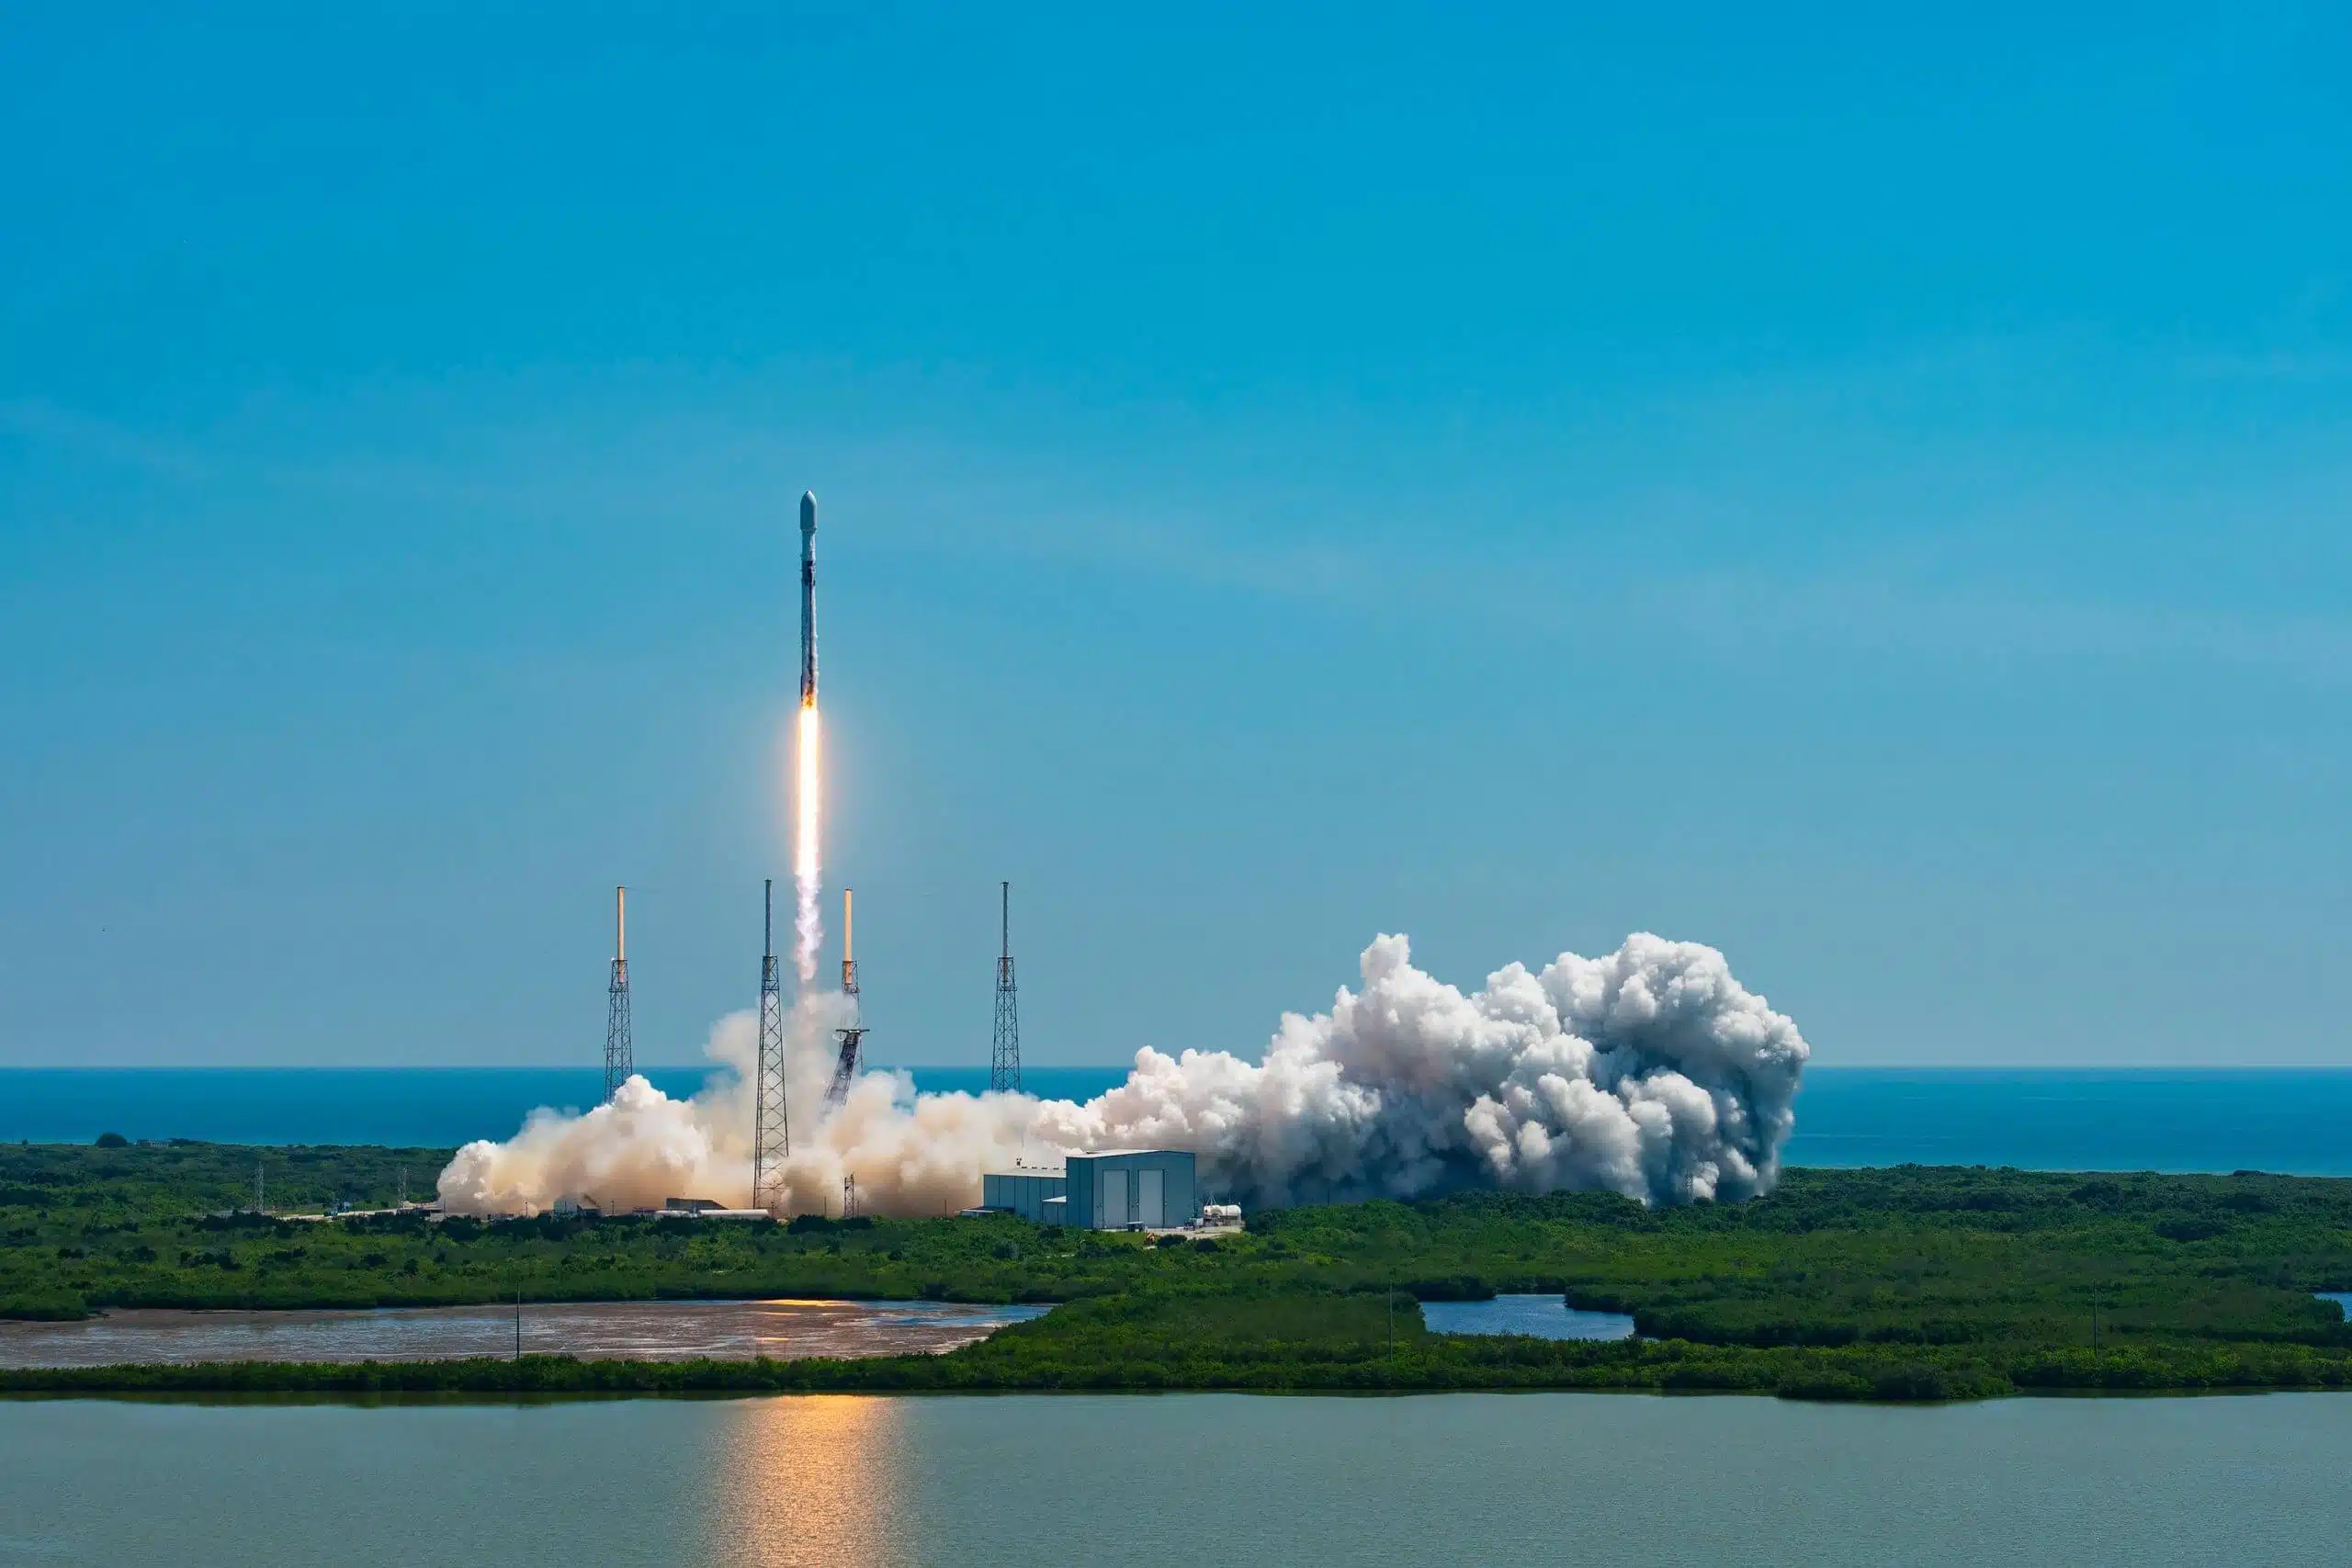 On July 1, 2023, the Euclid spacecraft was successfully launched aboard Space-X's Falcon 9 rocket. Its purpose is to explore the mysterious components of the universe, dark matter and dark energy. Credit: Credit: SpaceX